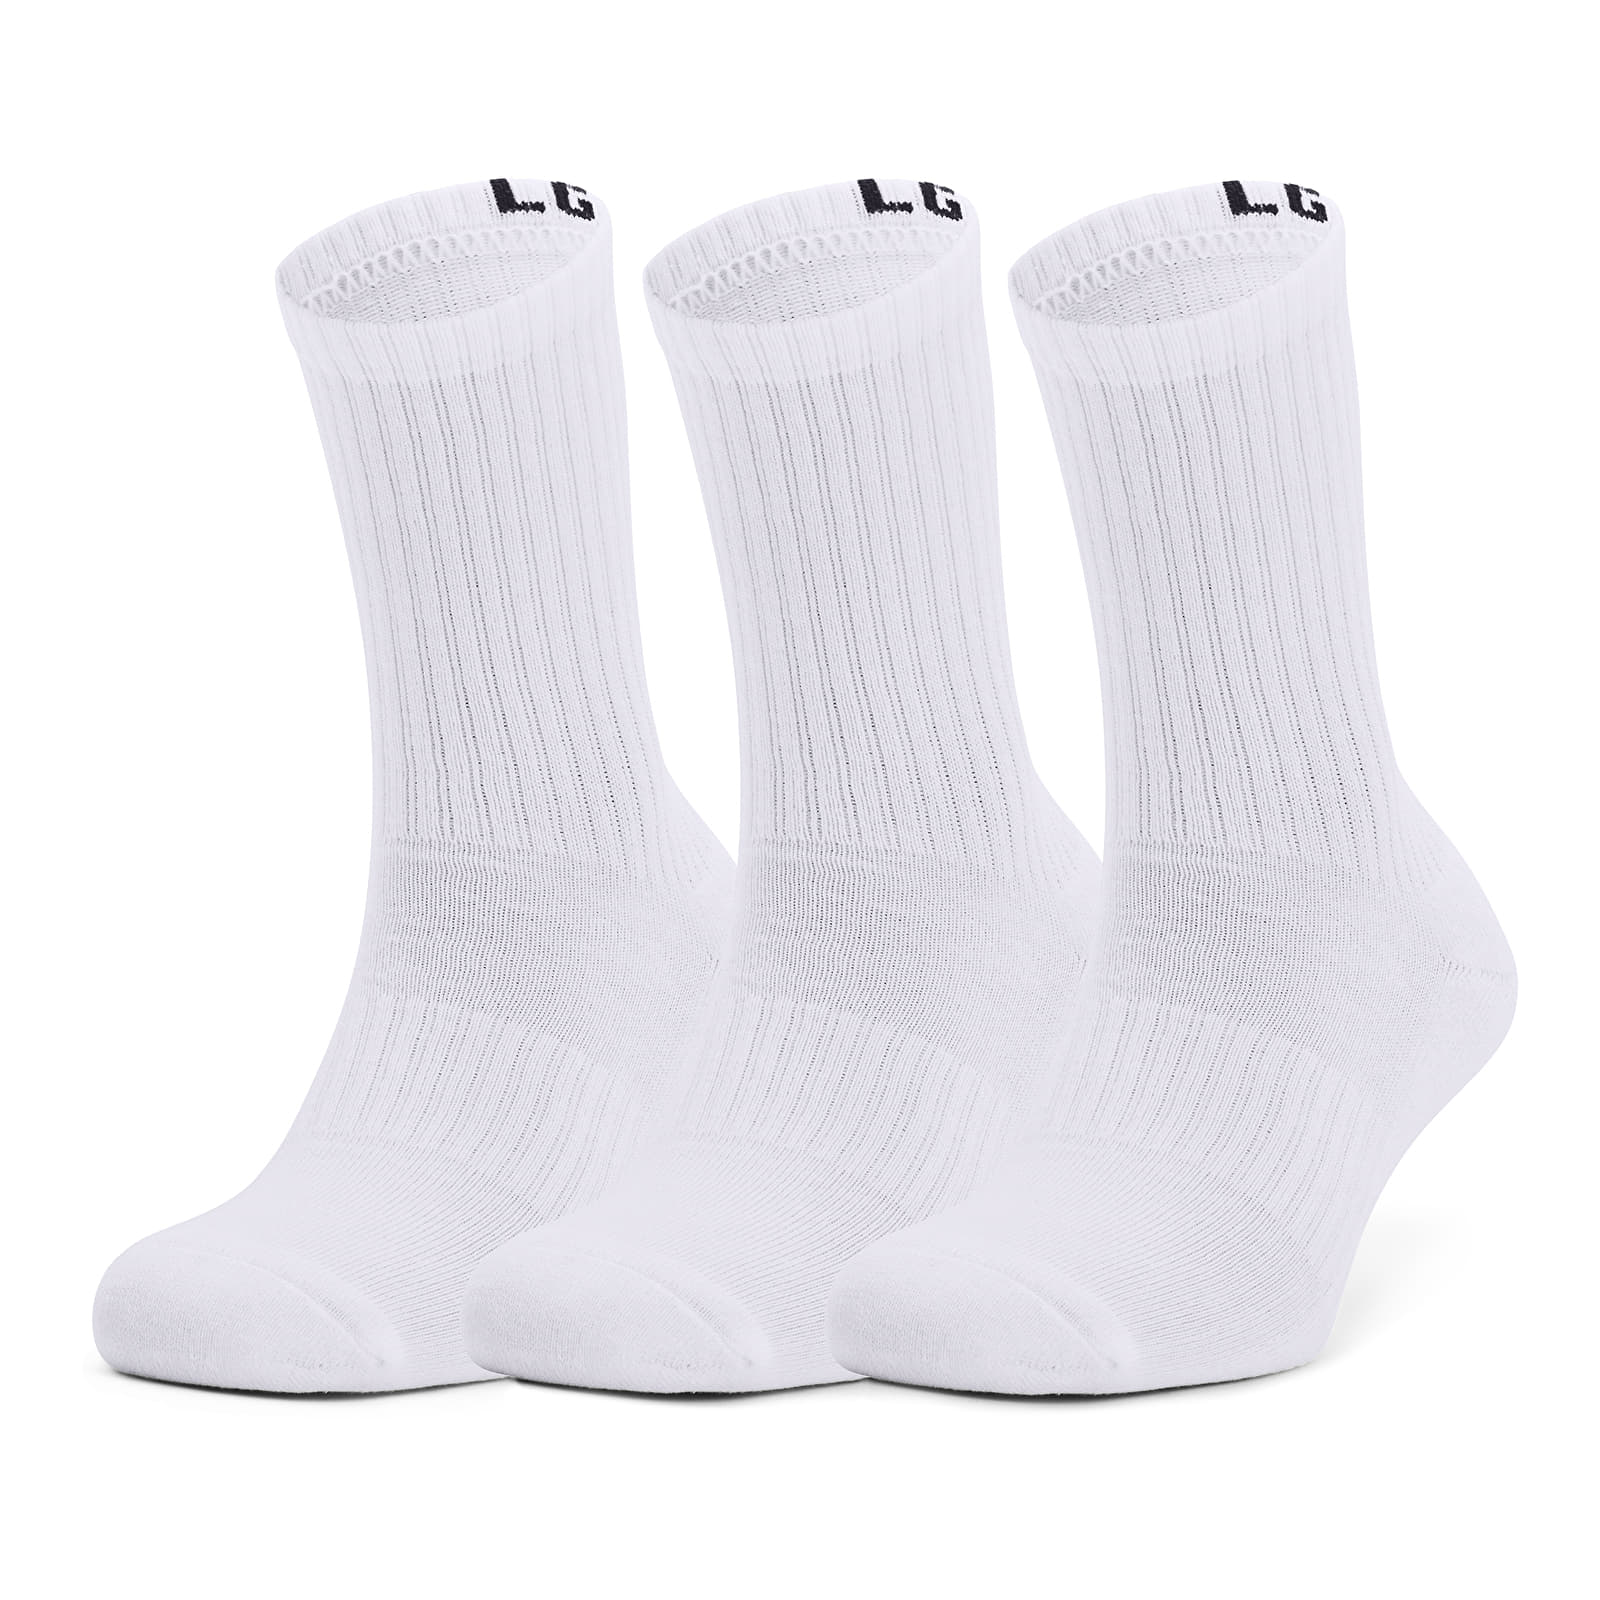 Accessories Under Armour Core Crew 3 Pack Socks White/ Black